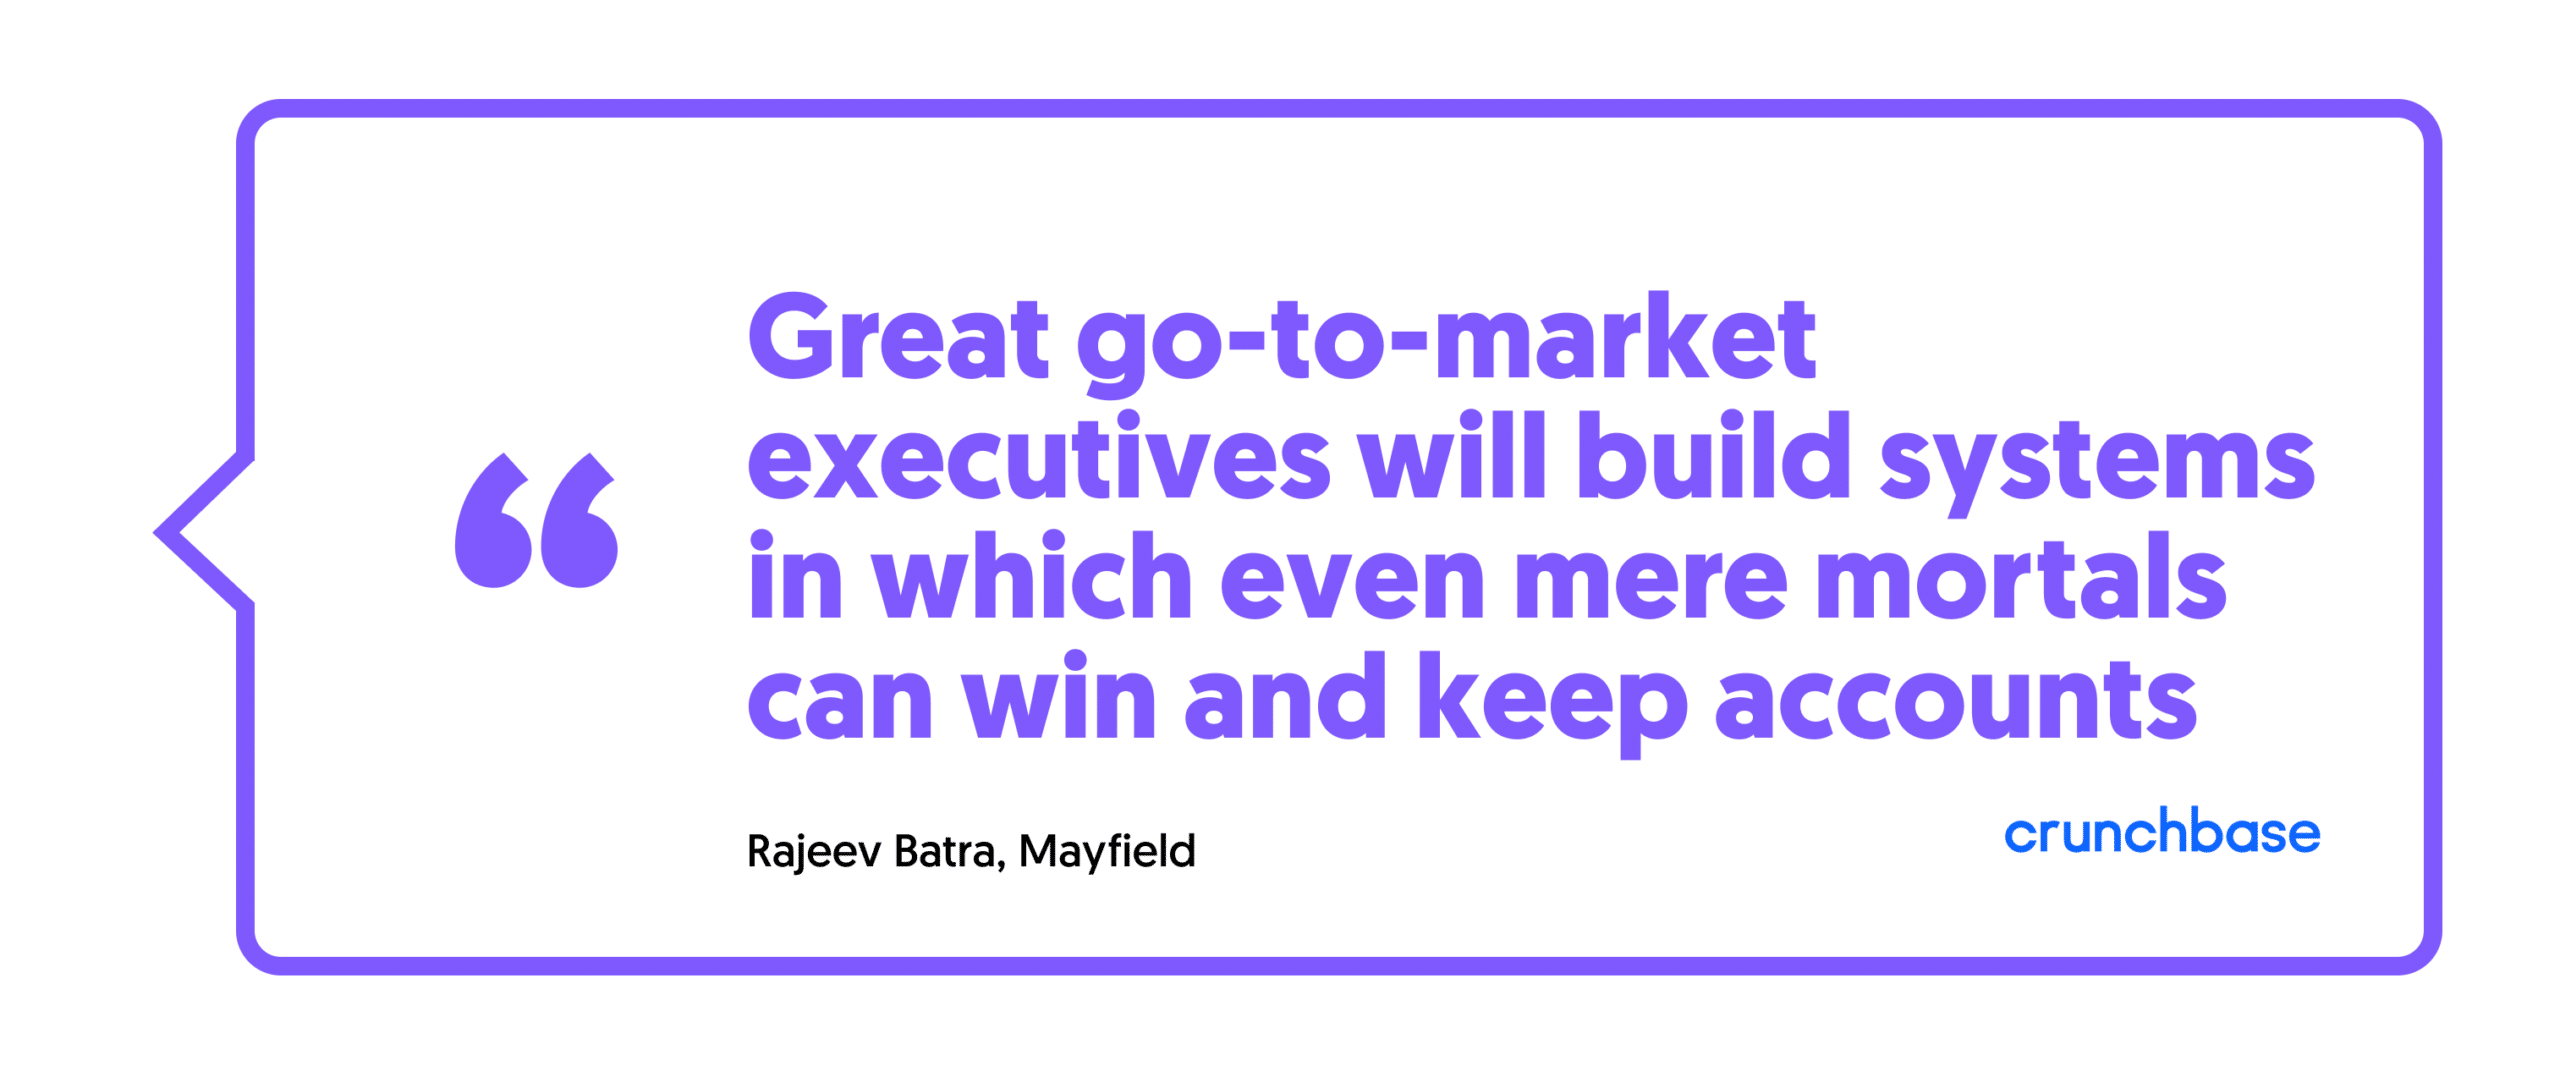 Great go-to-market executives will build systems in which even mere mortals can win and keep accounts - Rajeev Batra, Mayfield